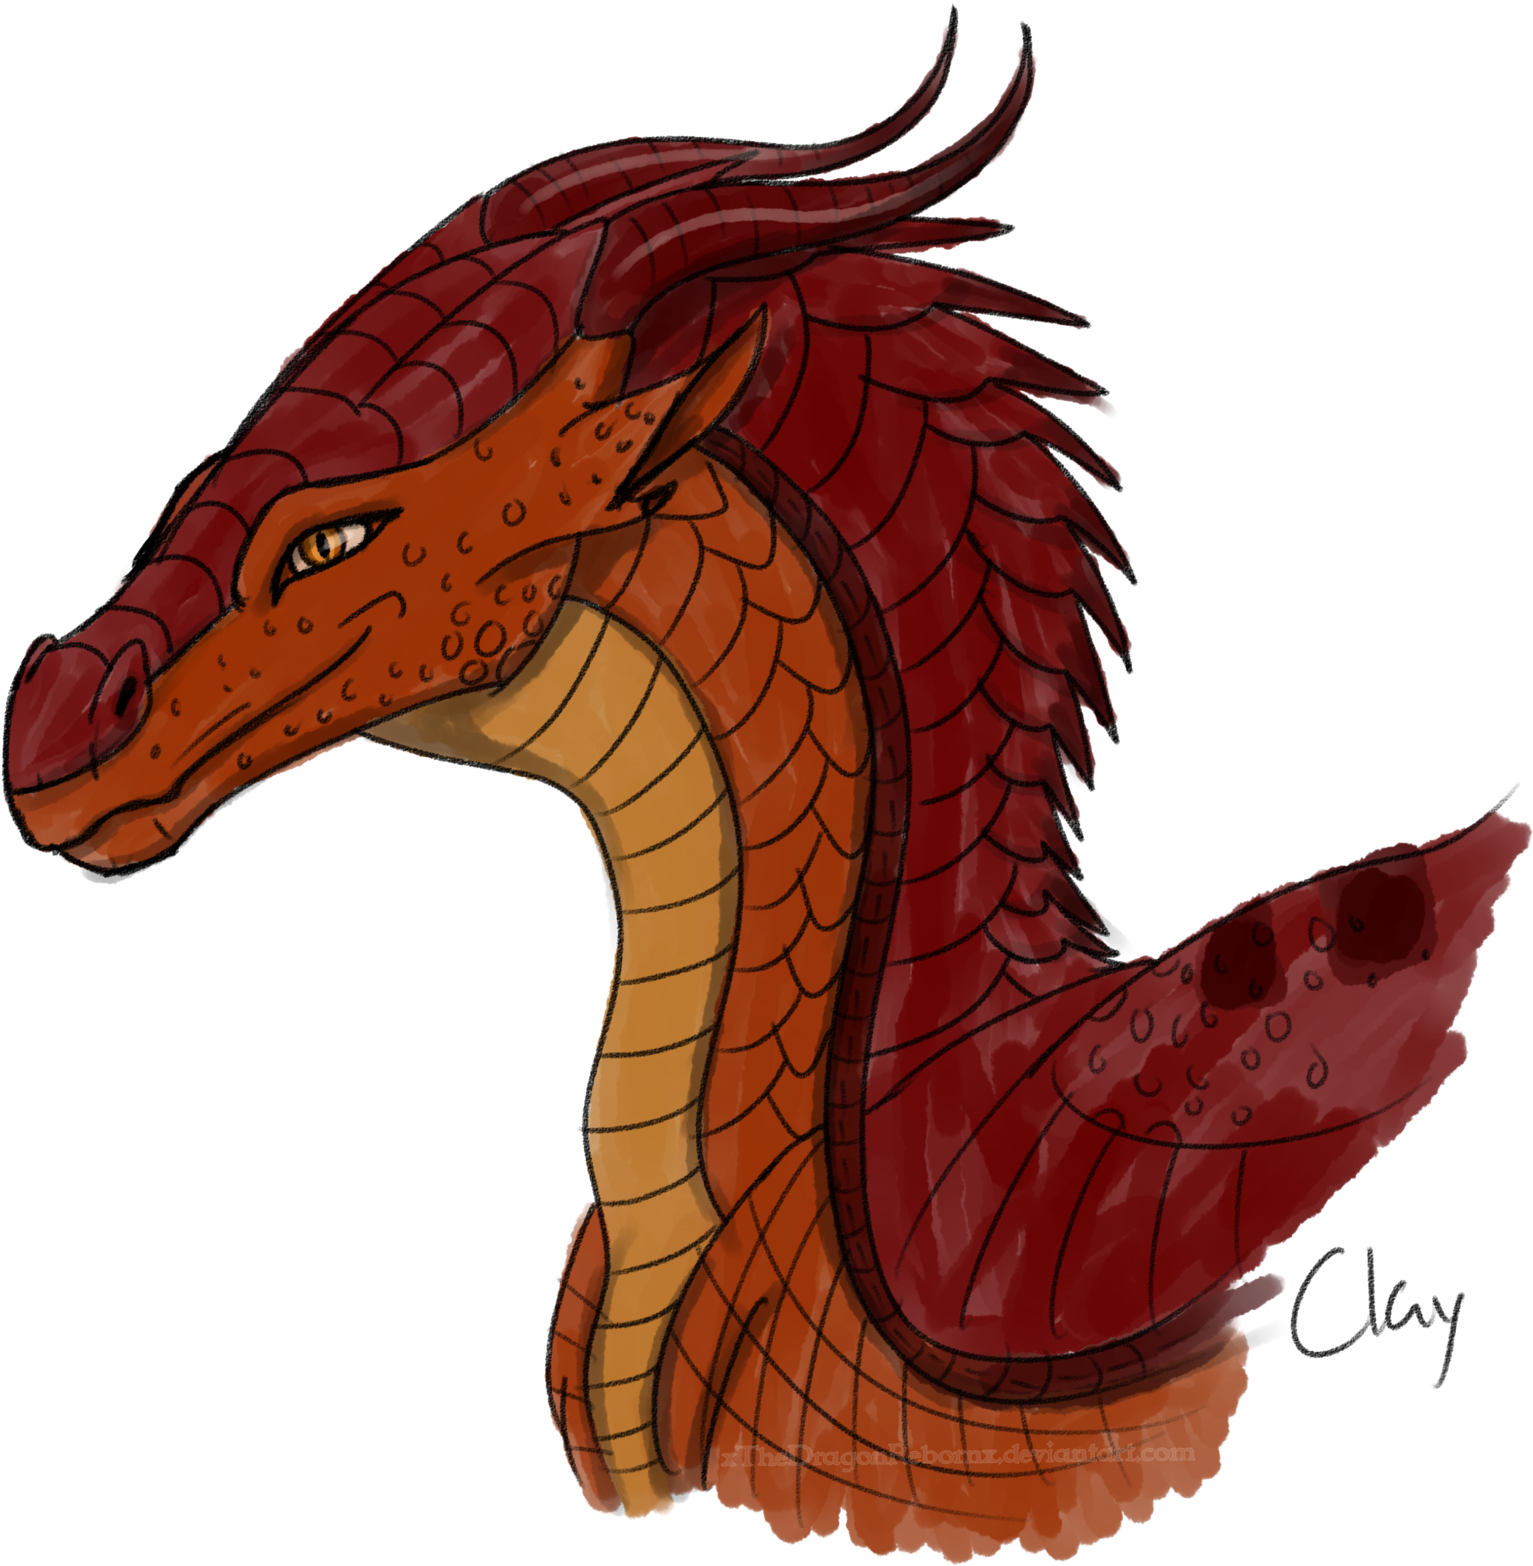 Xthedragonrebornx Wof D A D Day - Wings Of Fire Xthedragonrebornx Clay (1600x1600)